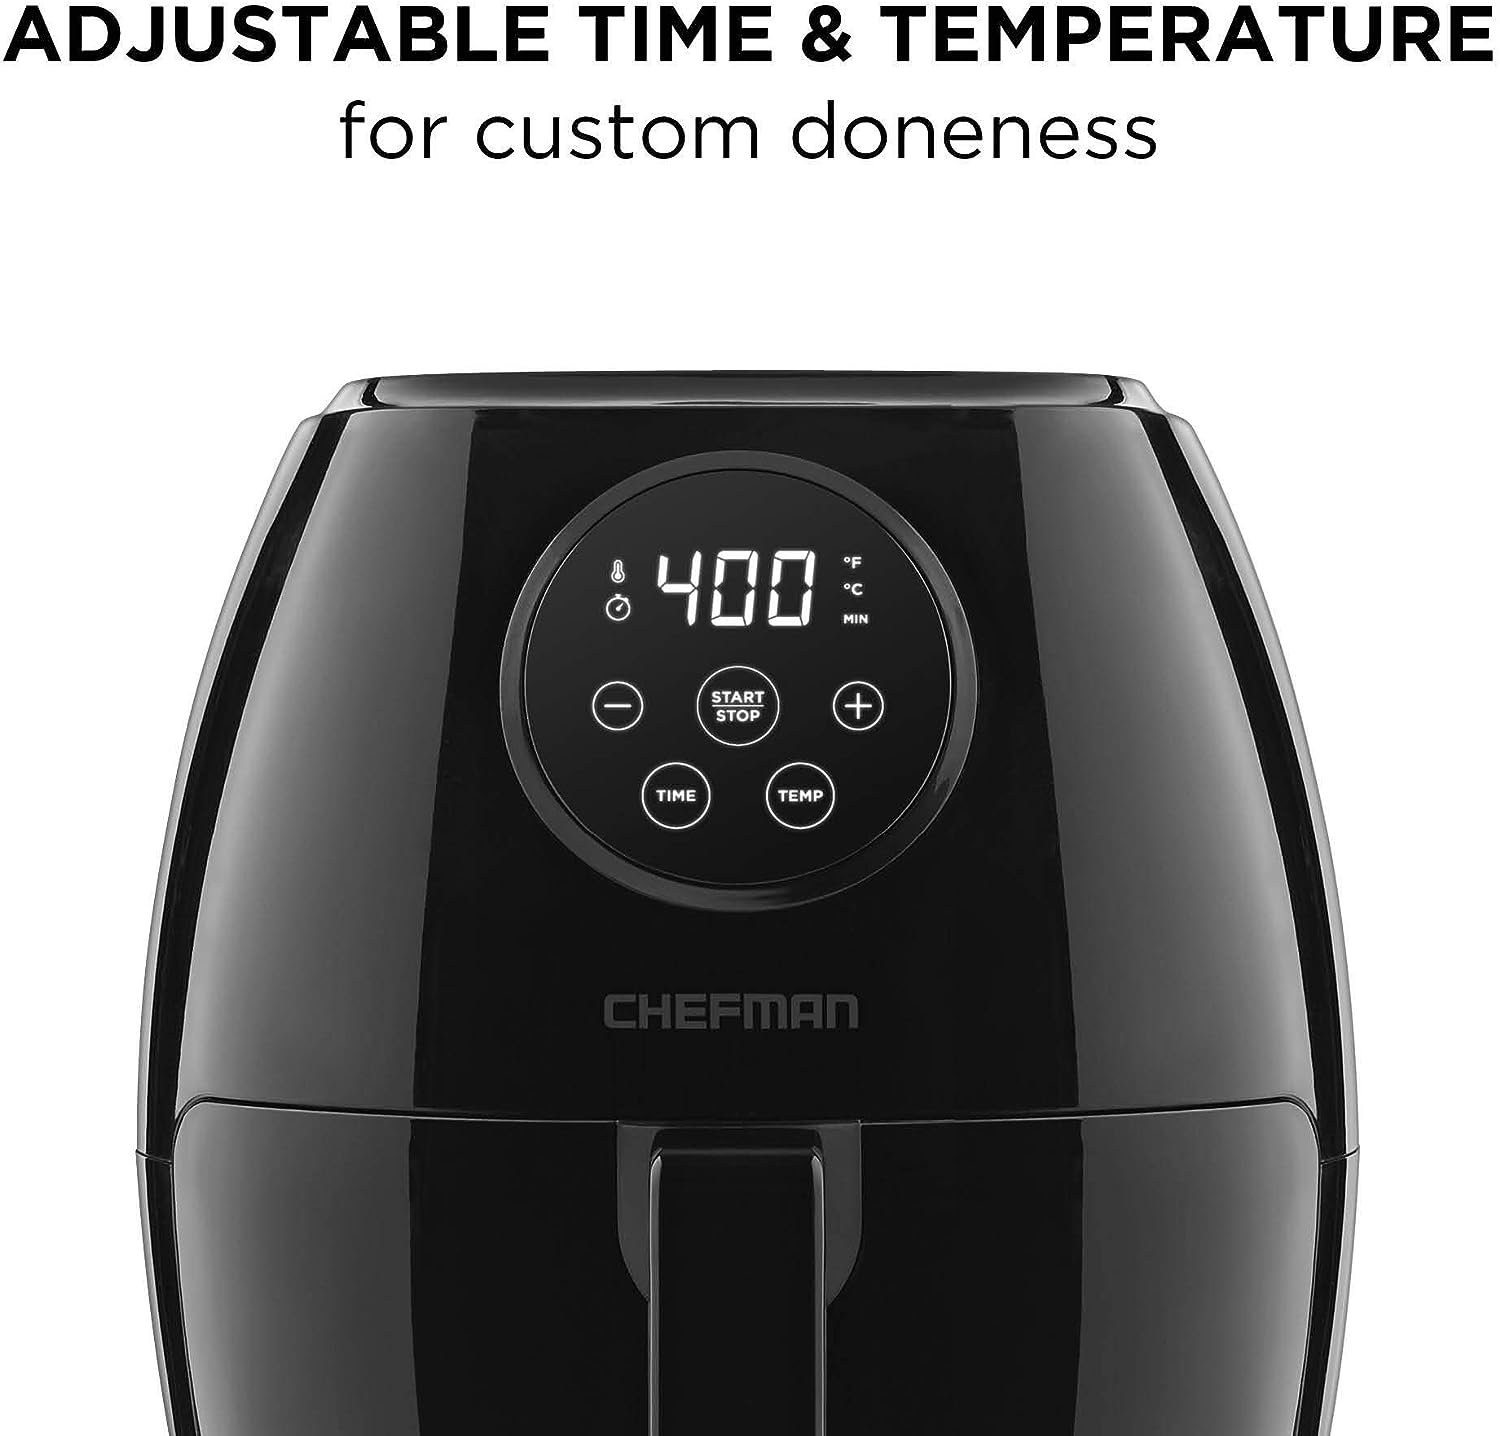 CHEFMAN Small Air Fryer Healthy Cooking, Nonstick, User Friendly and Digital Touch Screen, w/ 60 Minute Timer  Auto Shutoff, Dishwasher Safe Basket, BPA-Free, Glossy Black, 3.5 Qt.